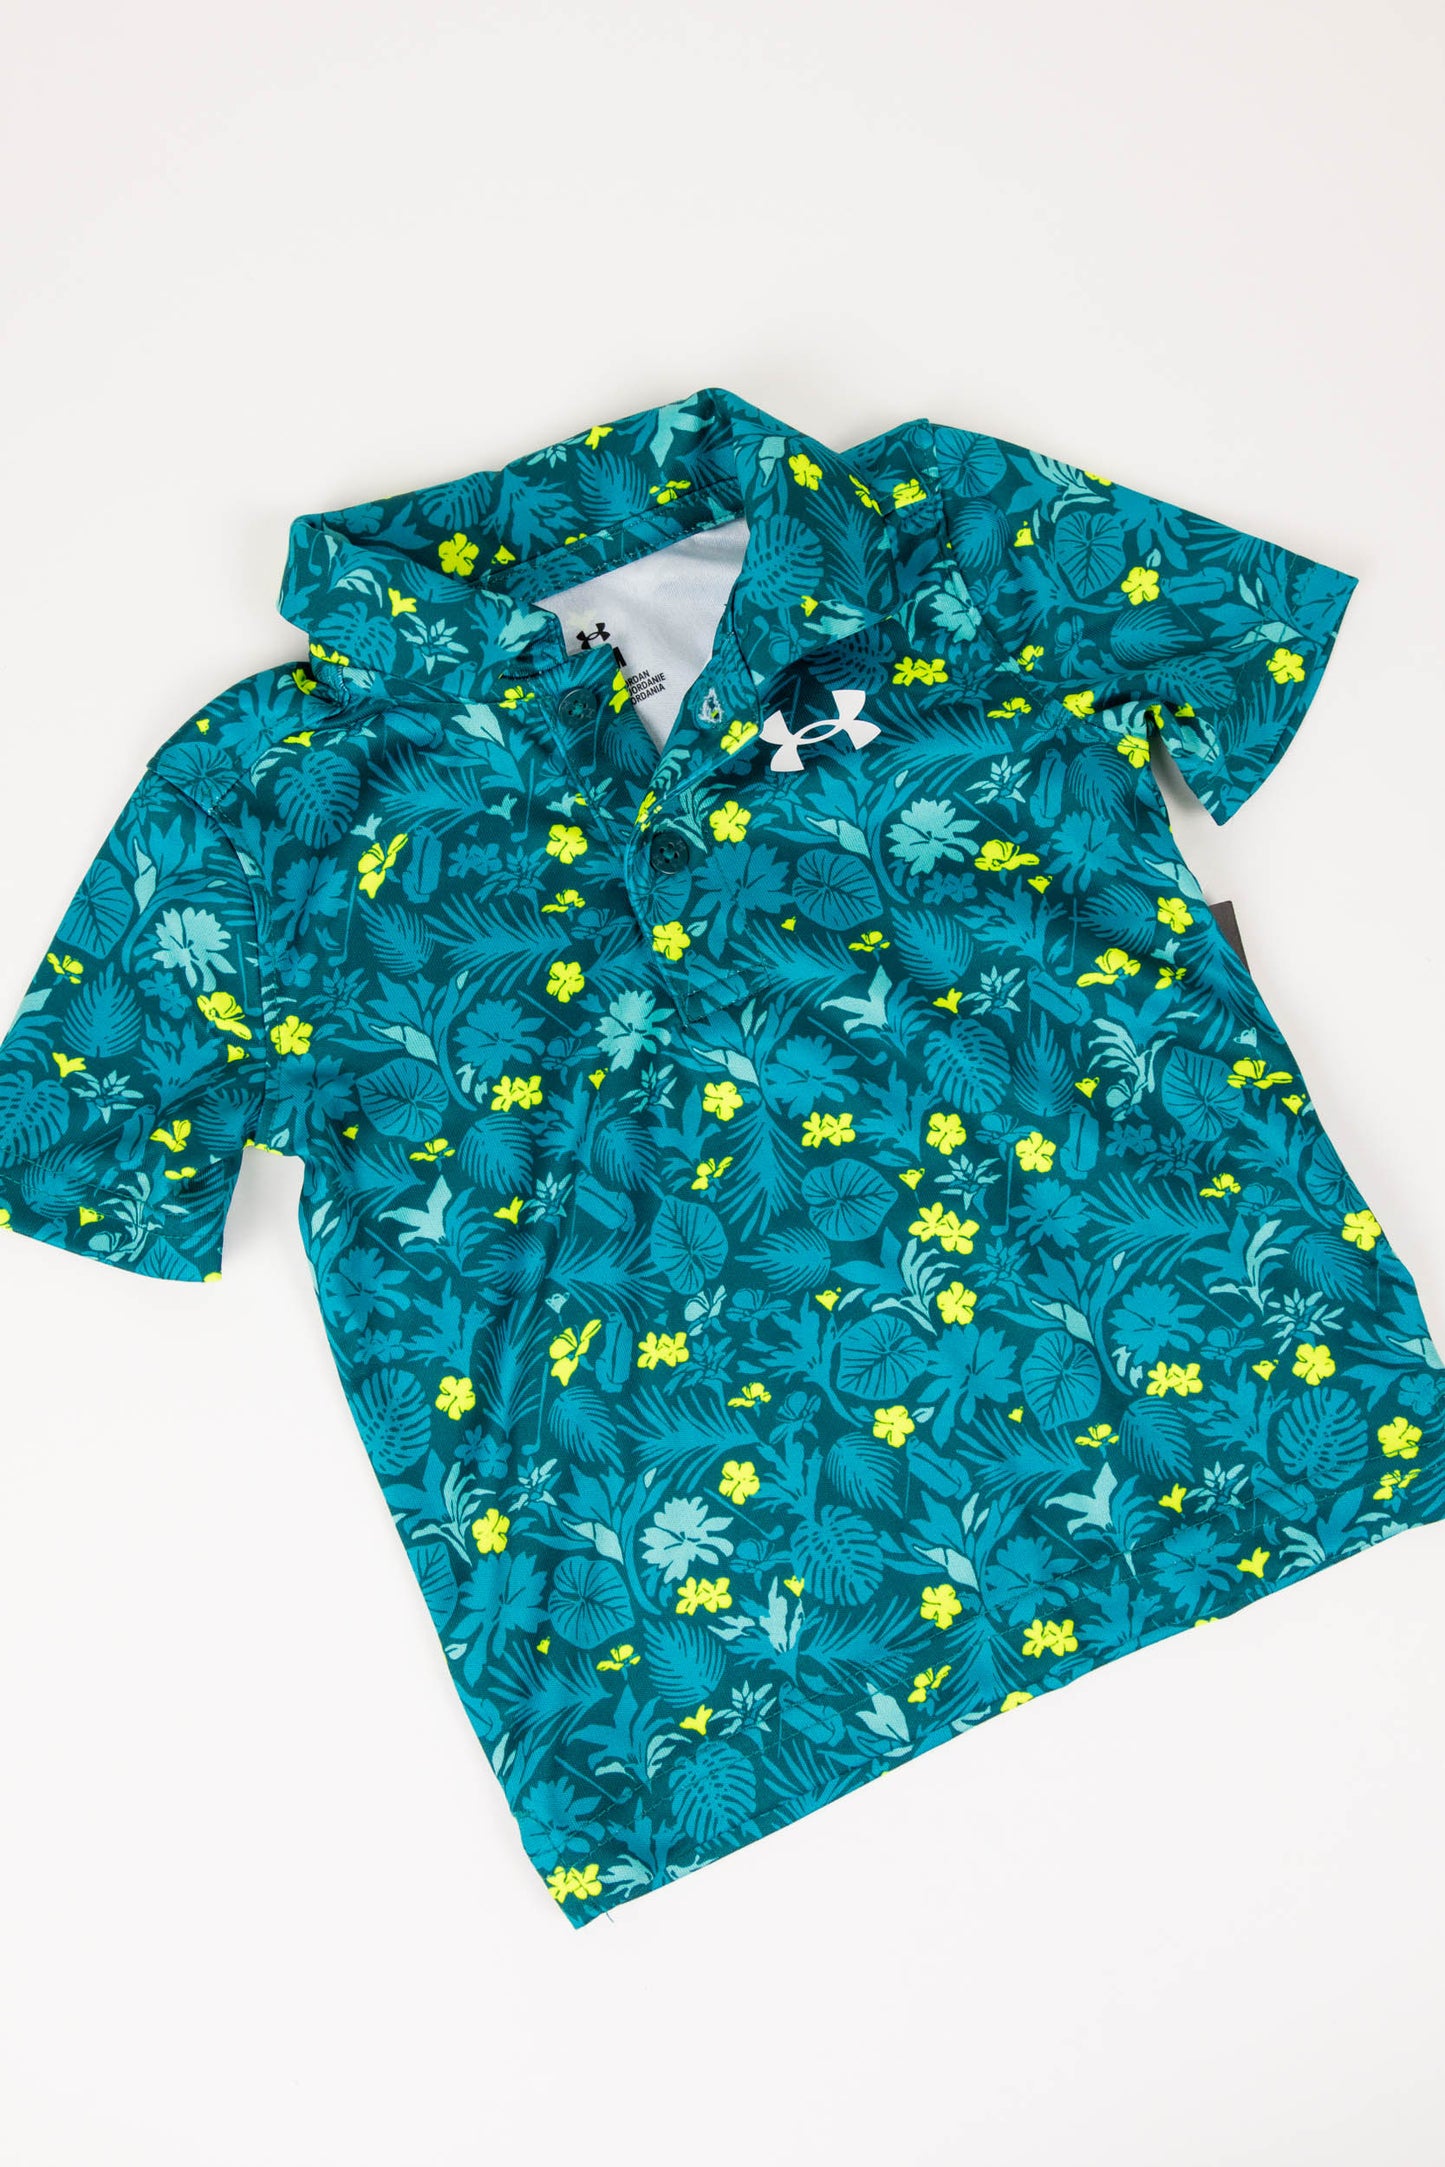 Under Armour Printed Polo | Hydro Teal